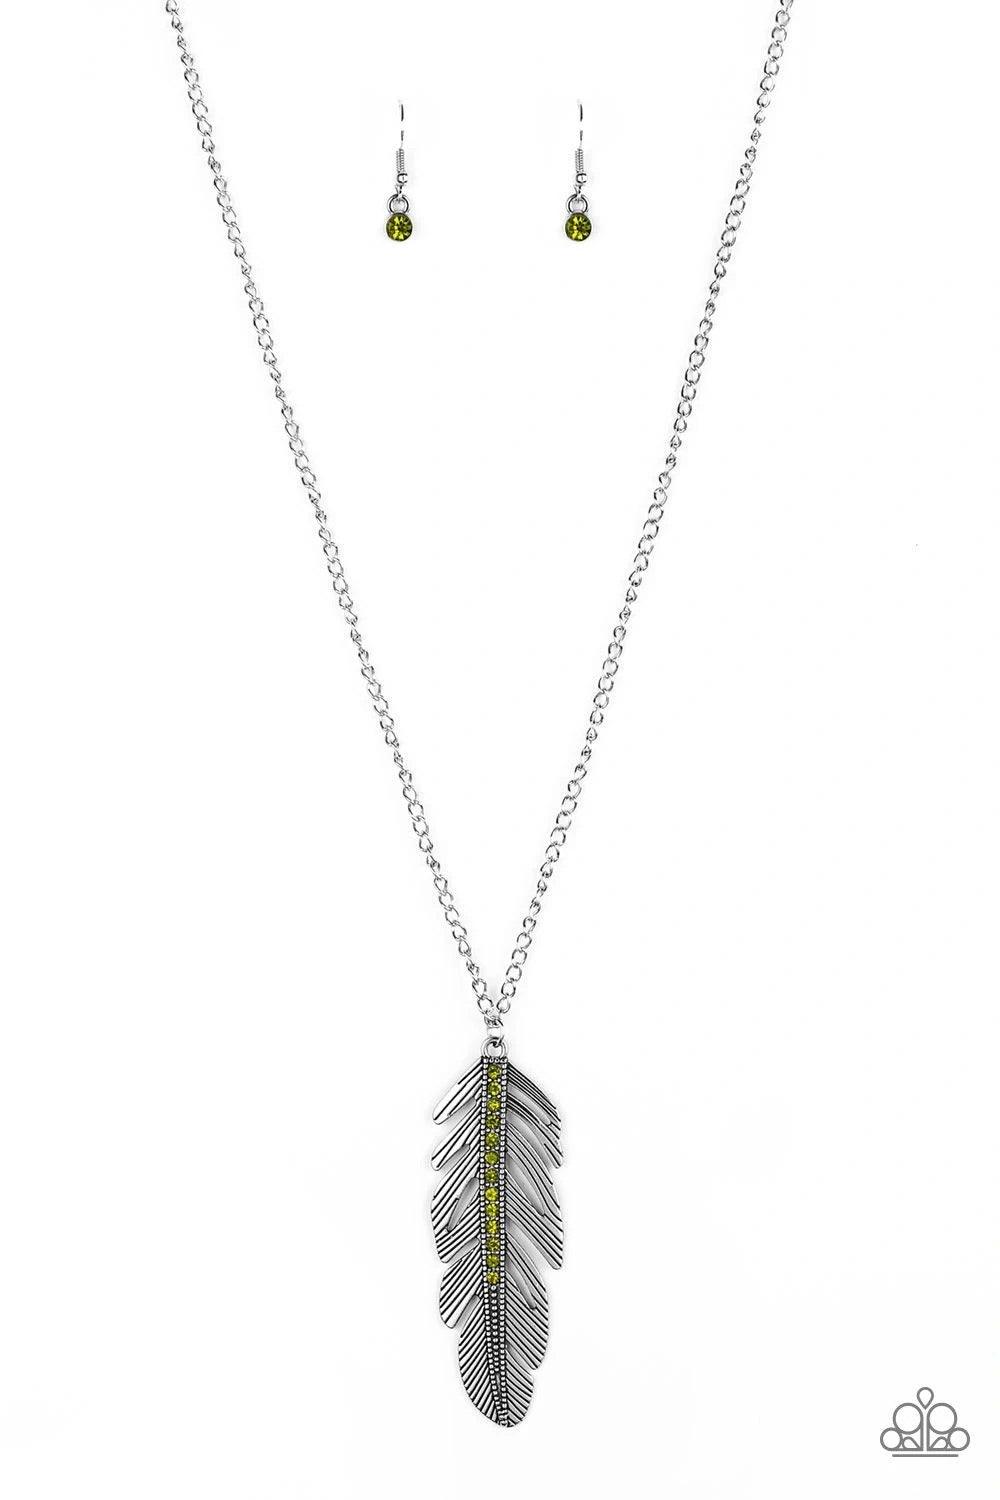 Paparazzi Accessories Sky Quest - Green Glittery green rhinestones are encrusted down the spine of a life-like silver feather. The whimsical pendant swings from the bottom of a lengthened silver chain for a seasonal look. Features an adjustable clasp clos